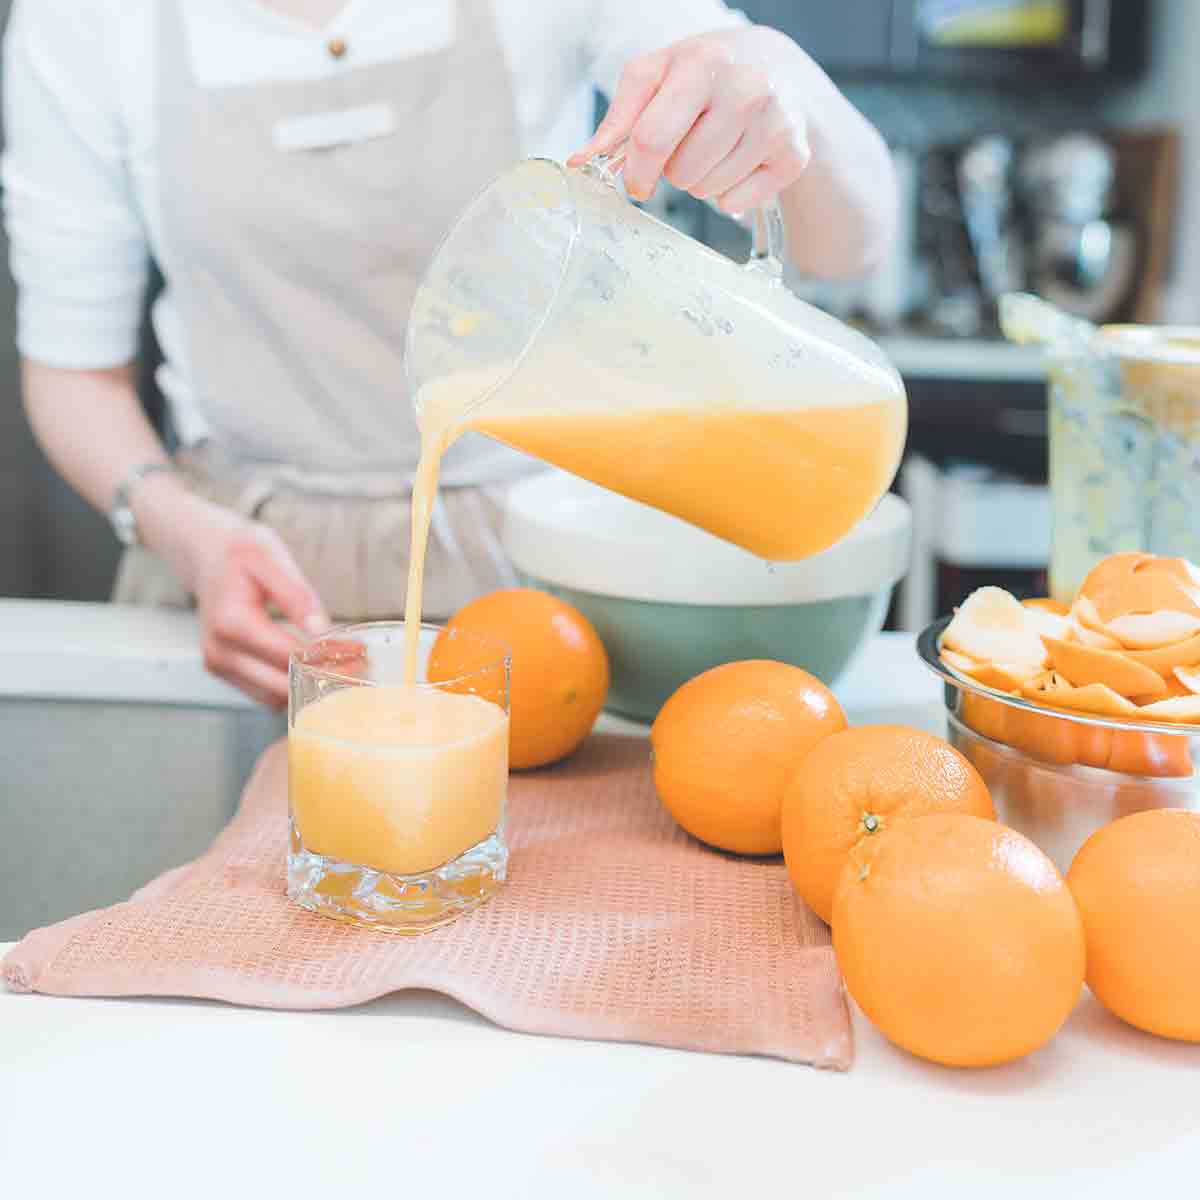 Woman Pouring Orange Juice Into A Glass